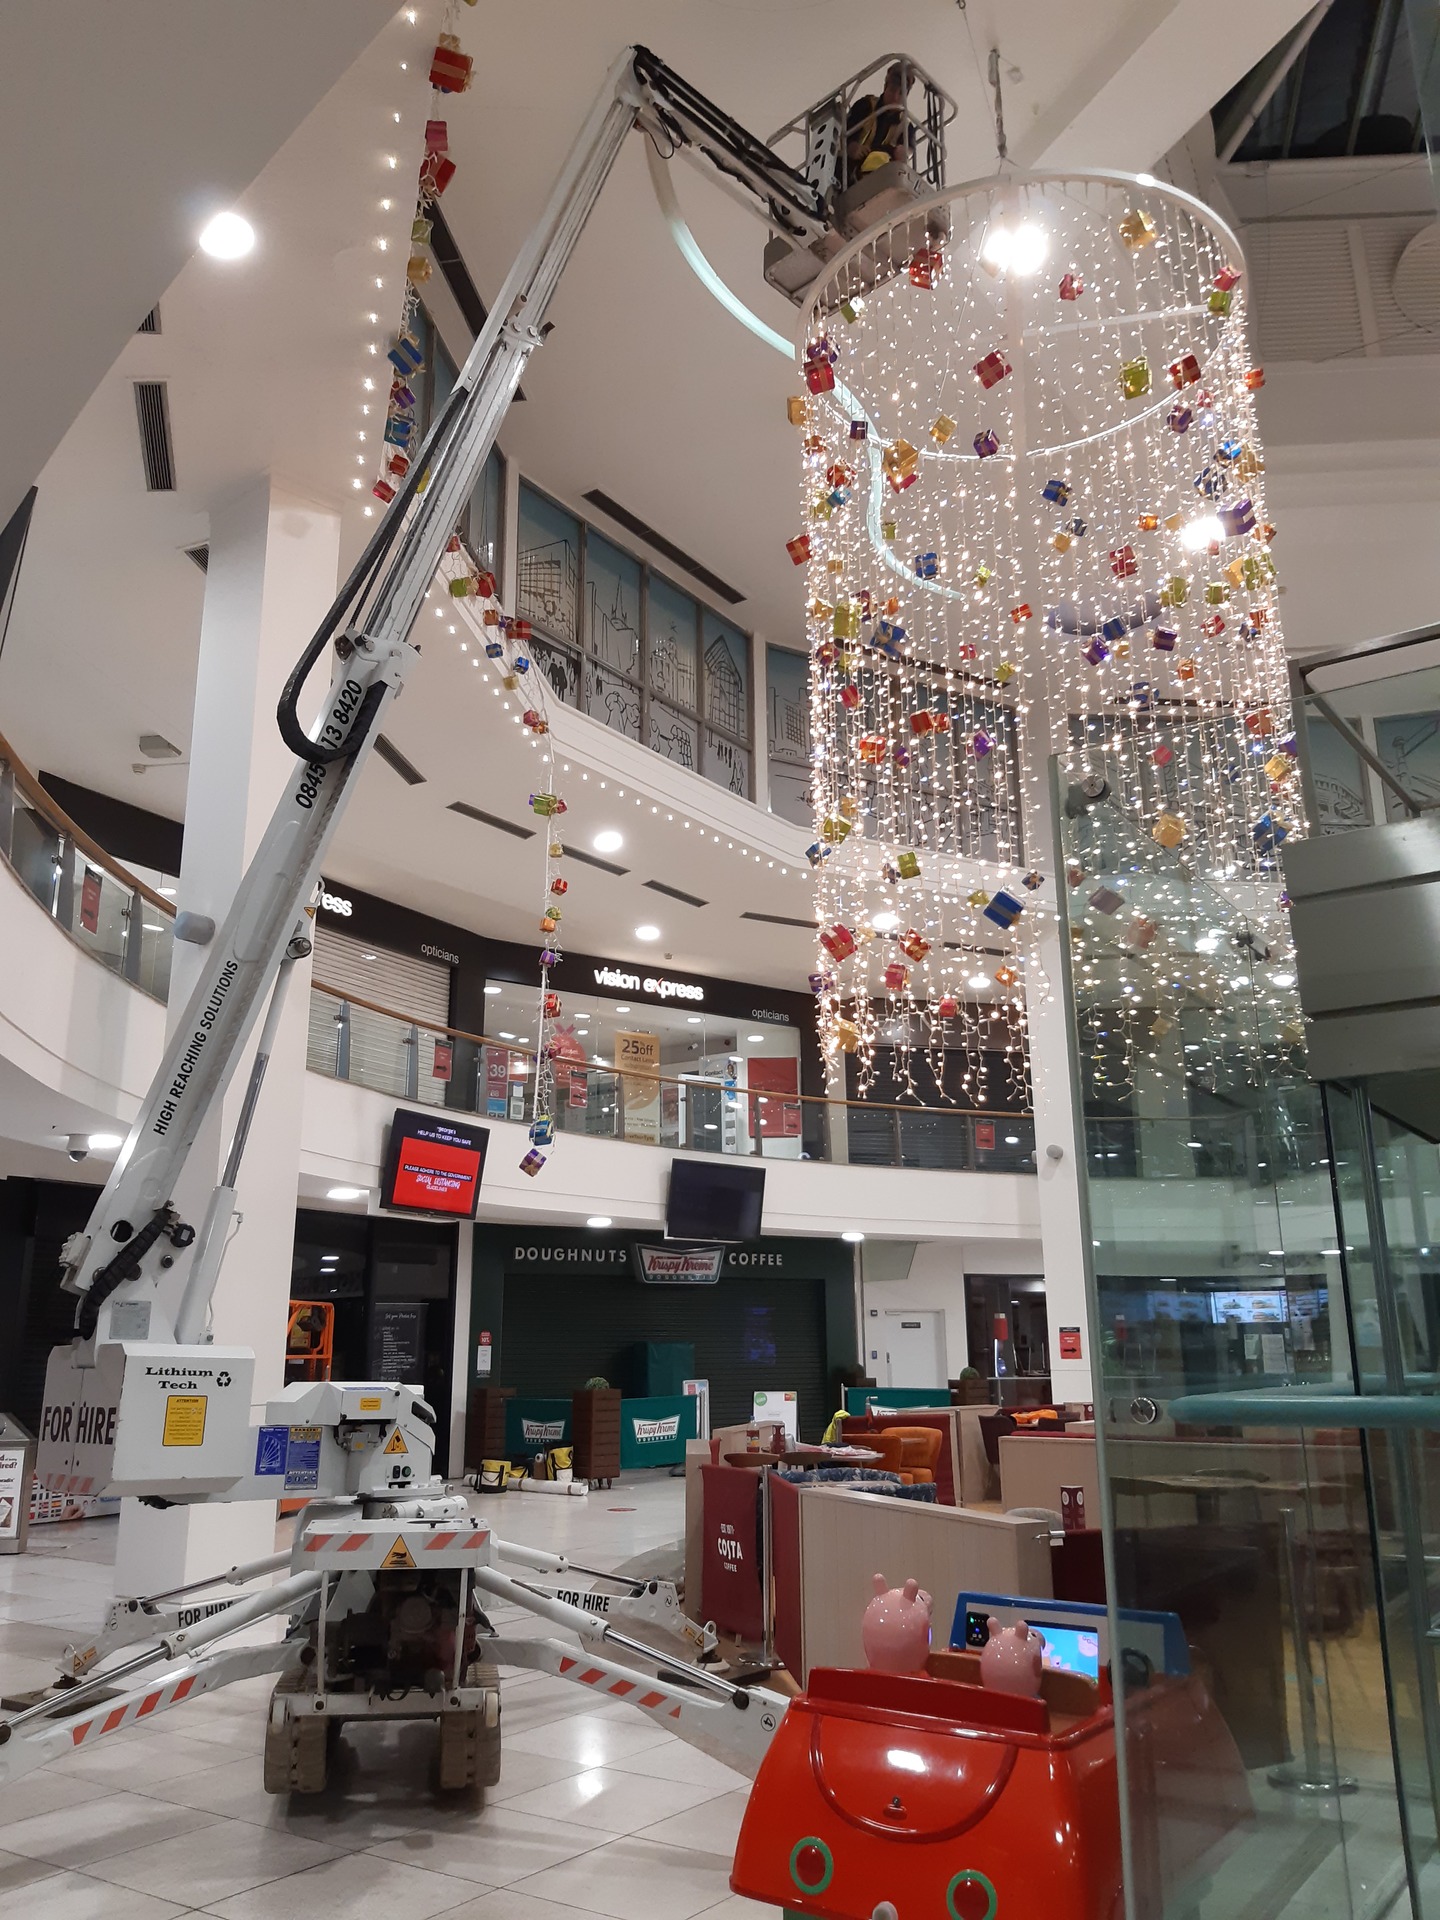 Scarlett Grace, 13m Lithium hybrid tracked spiderlift cherrypicker from High Reaching Solutions, assisting with the installation of Christmas decorations inside a shopping centre.